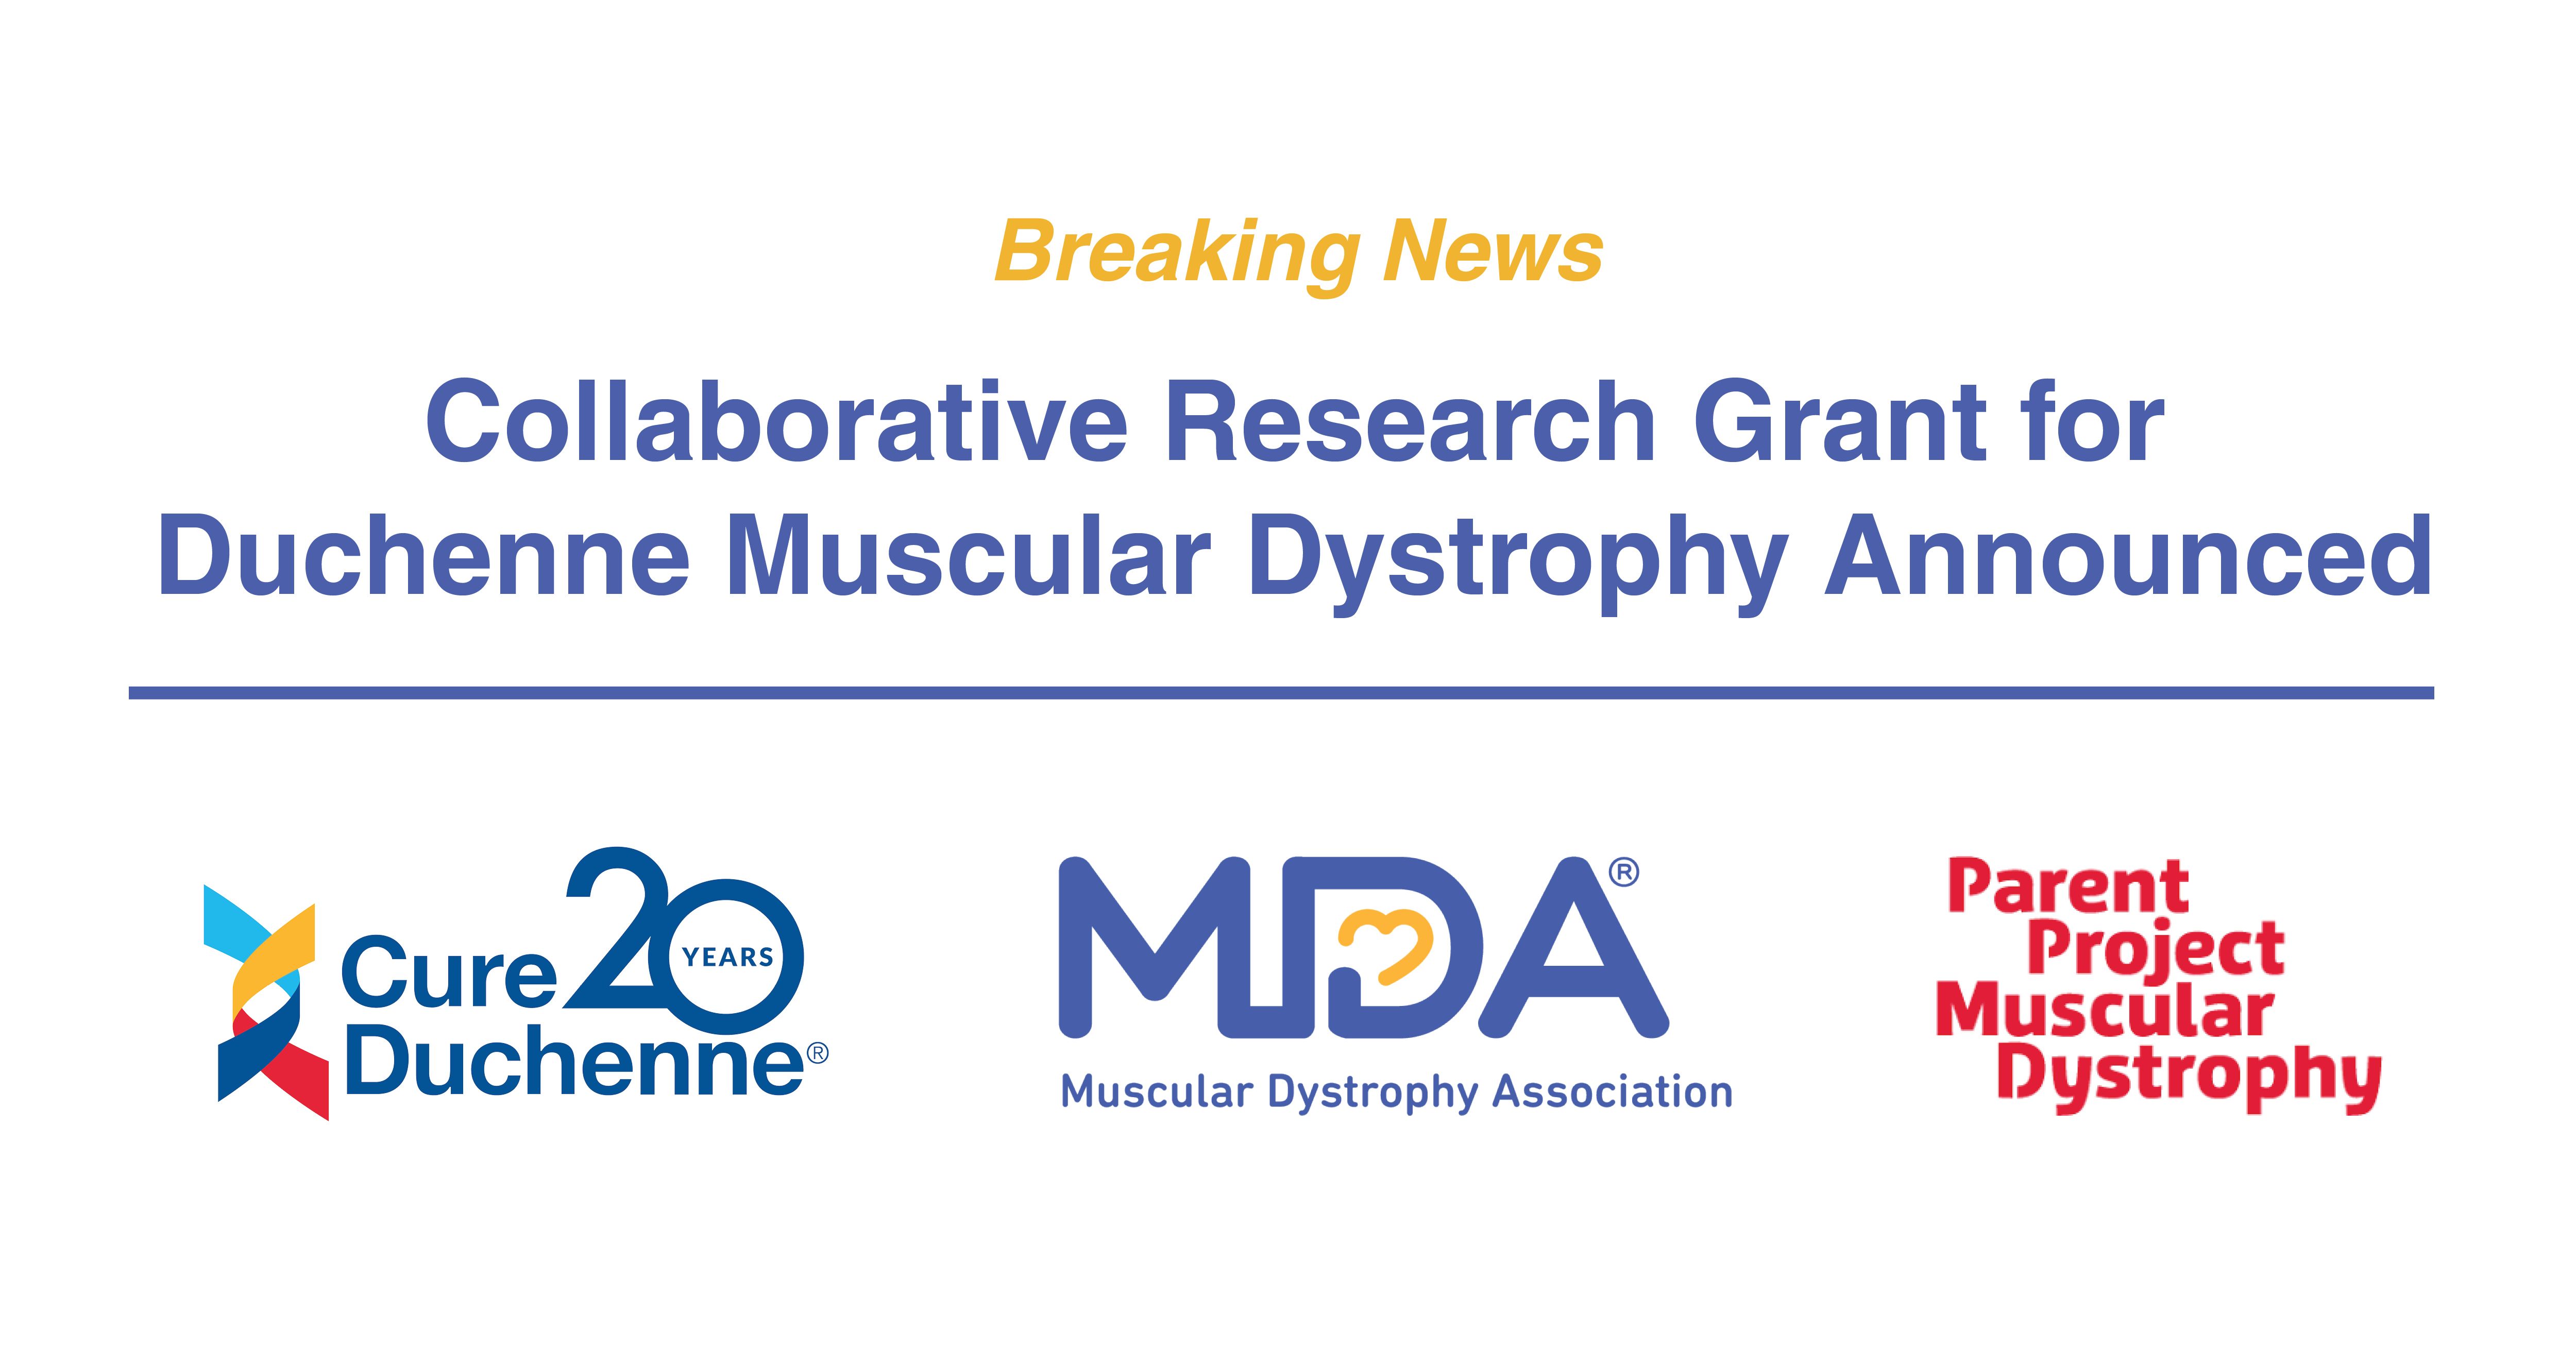 CureDuchenne, Muscular Dystrophy Association,  and Parent Project Muscular Dystrophy Announce Collaborative Project to Focus on Re-Dosing  Gene Therapy in Duchenne Muscular Dystrophy